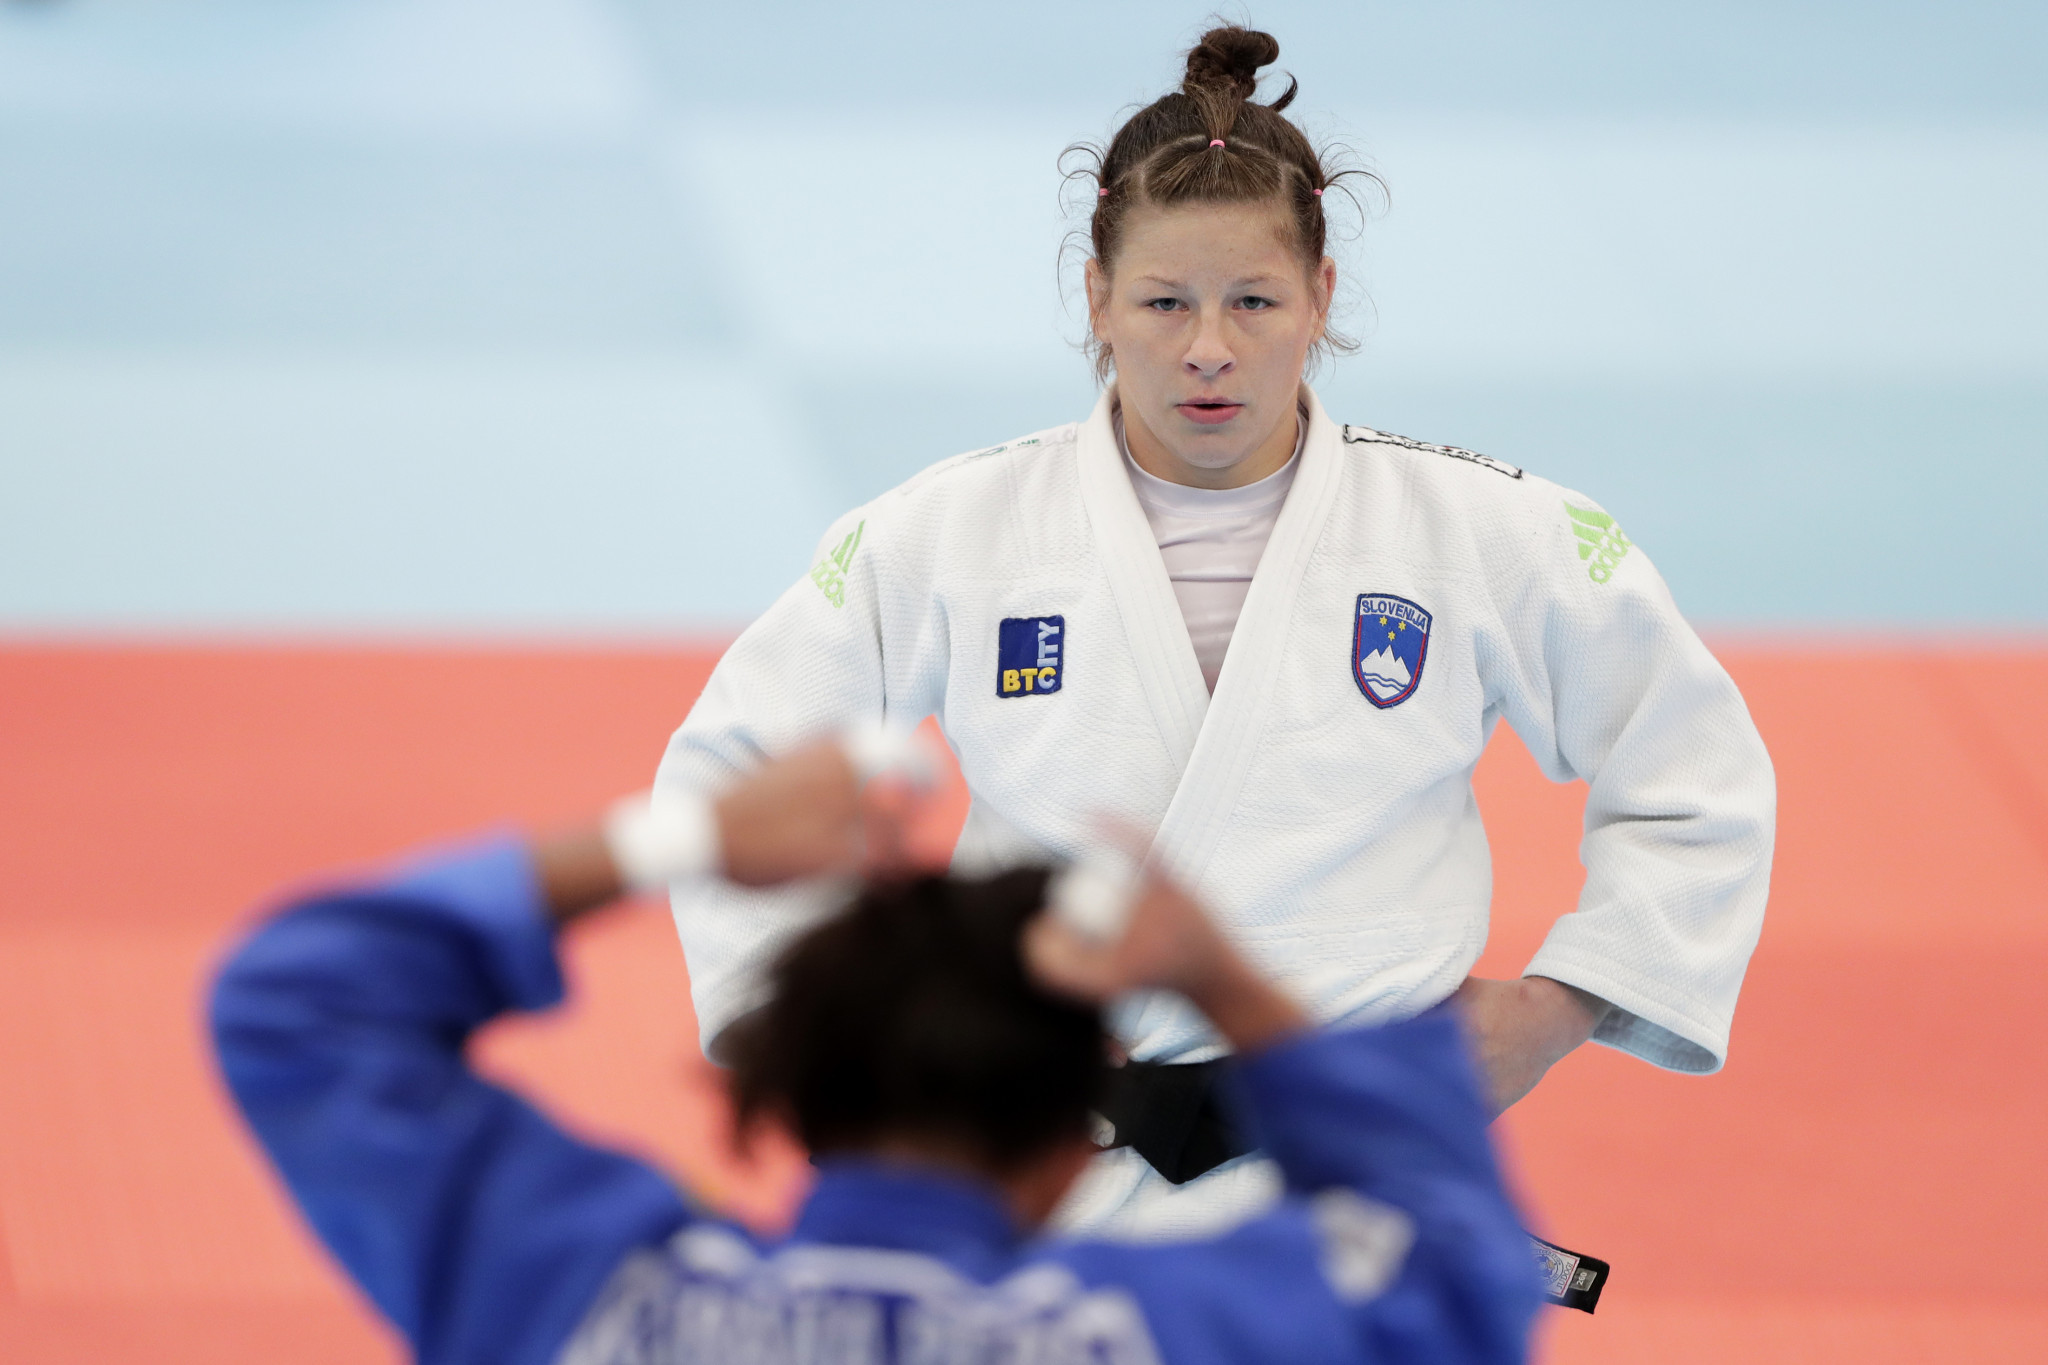 Olympic champion Trstenjak among winners on day two of European Judo Championships